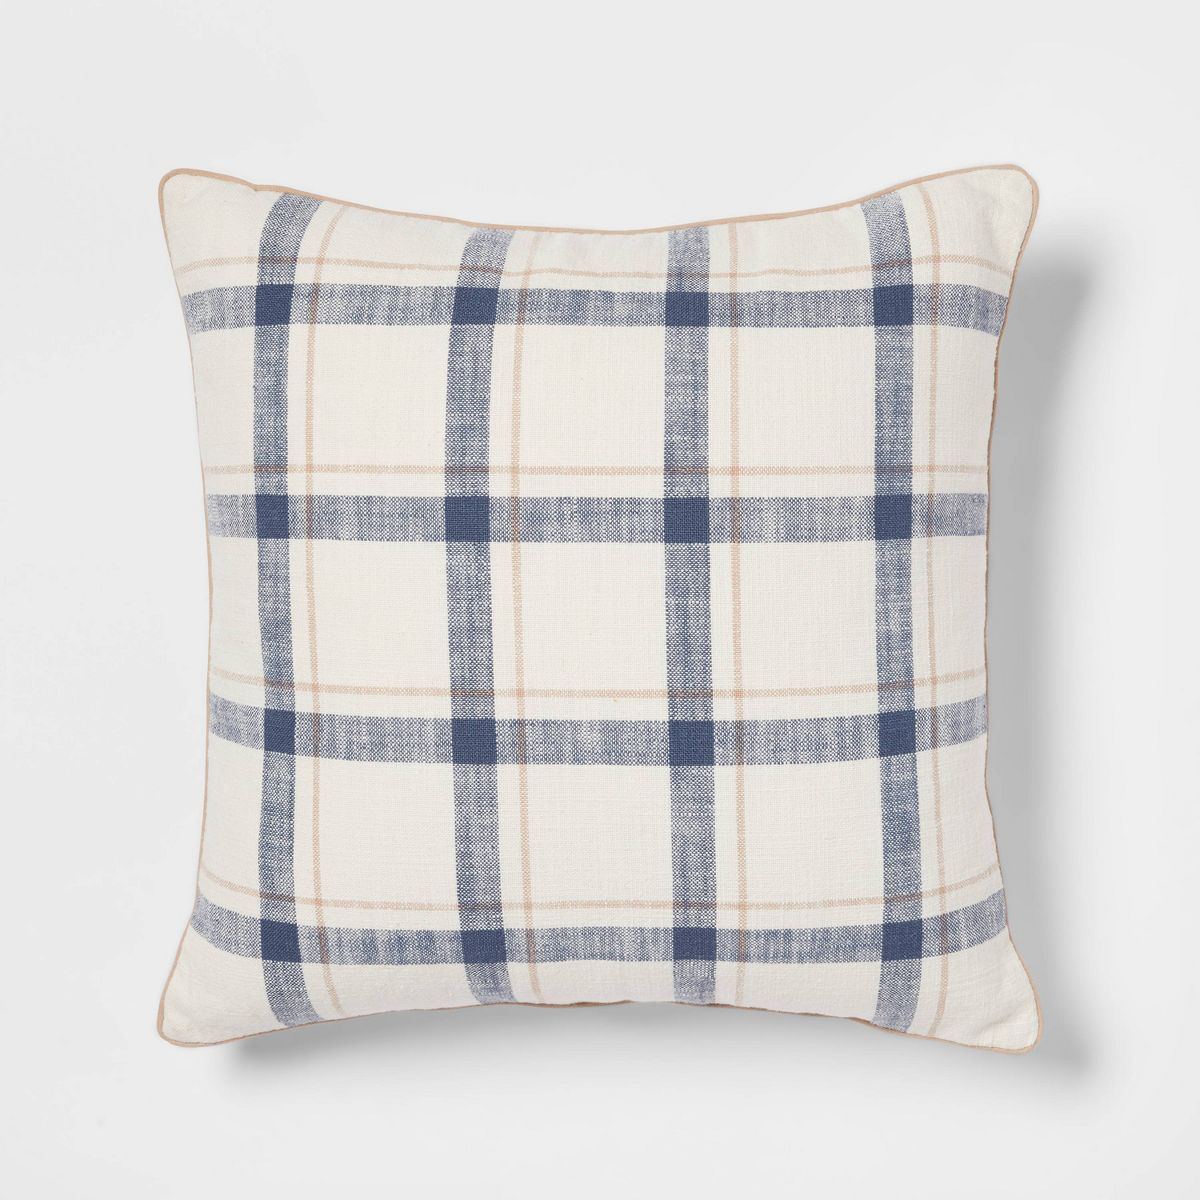 Woven Striped with Plaid Reverse Throw Pillow - Threshold™ | Target